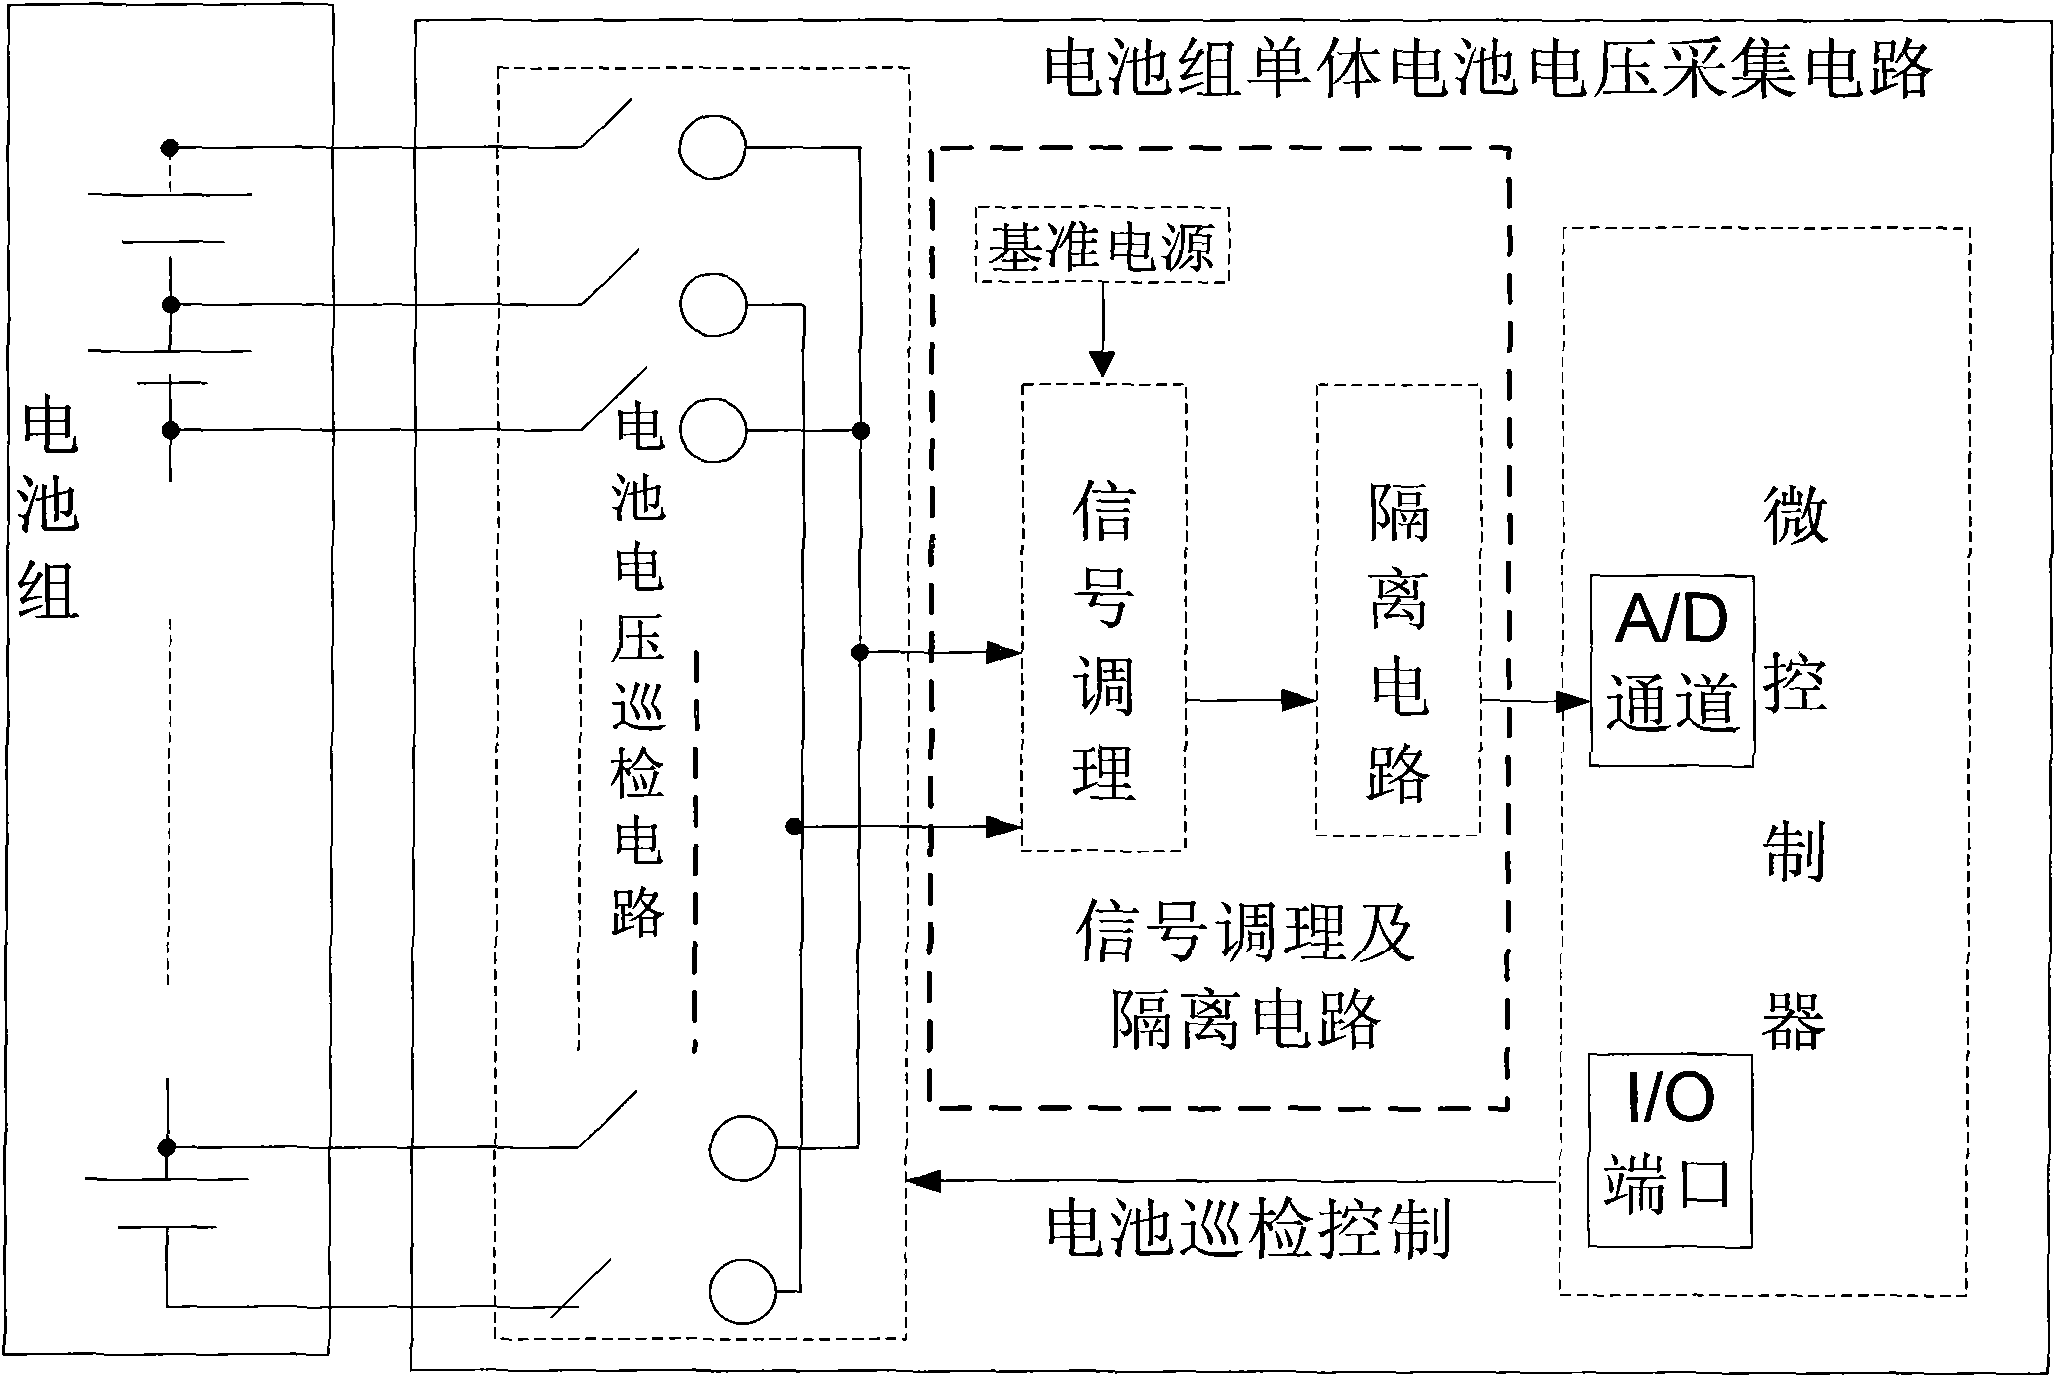 Voltage collecting circuit for monomer batteries of battery pack